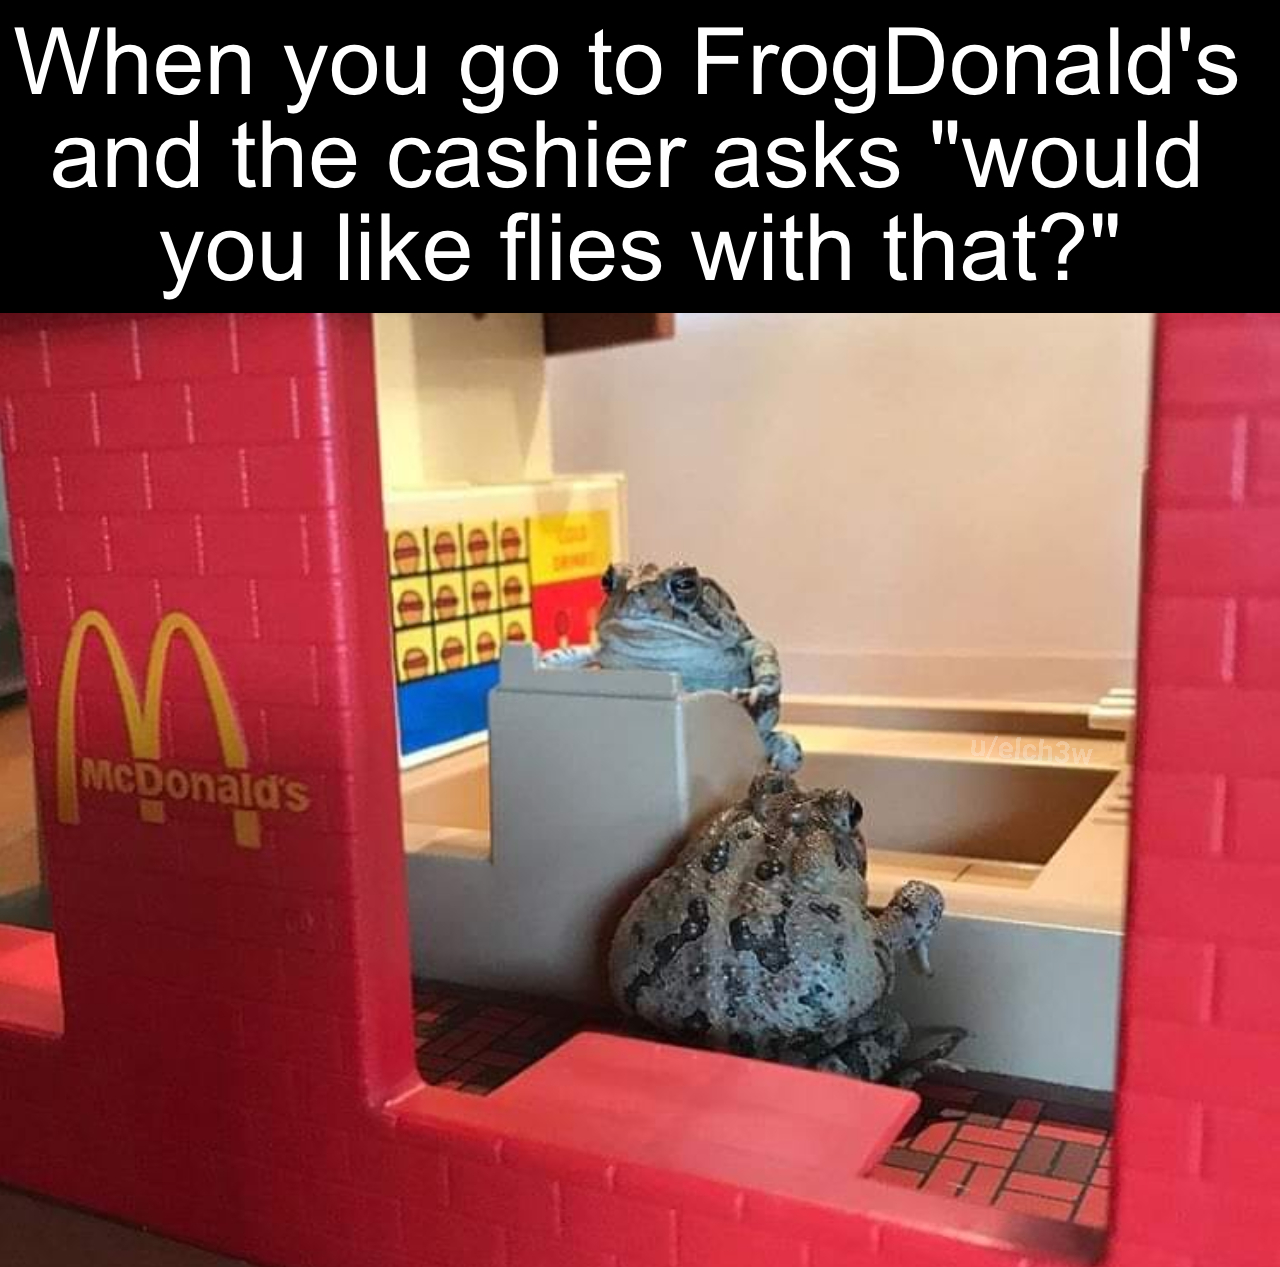 small fly please meme - When you go to FrogDonald's and the cashier asks "would you flies with that?" n McDonald's